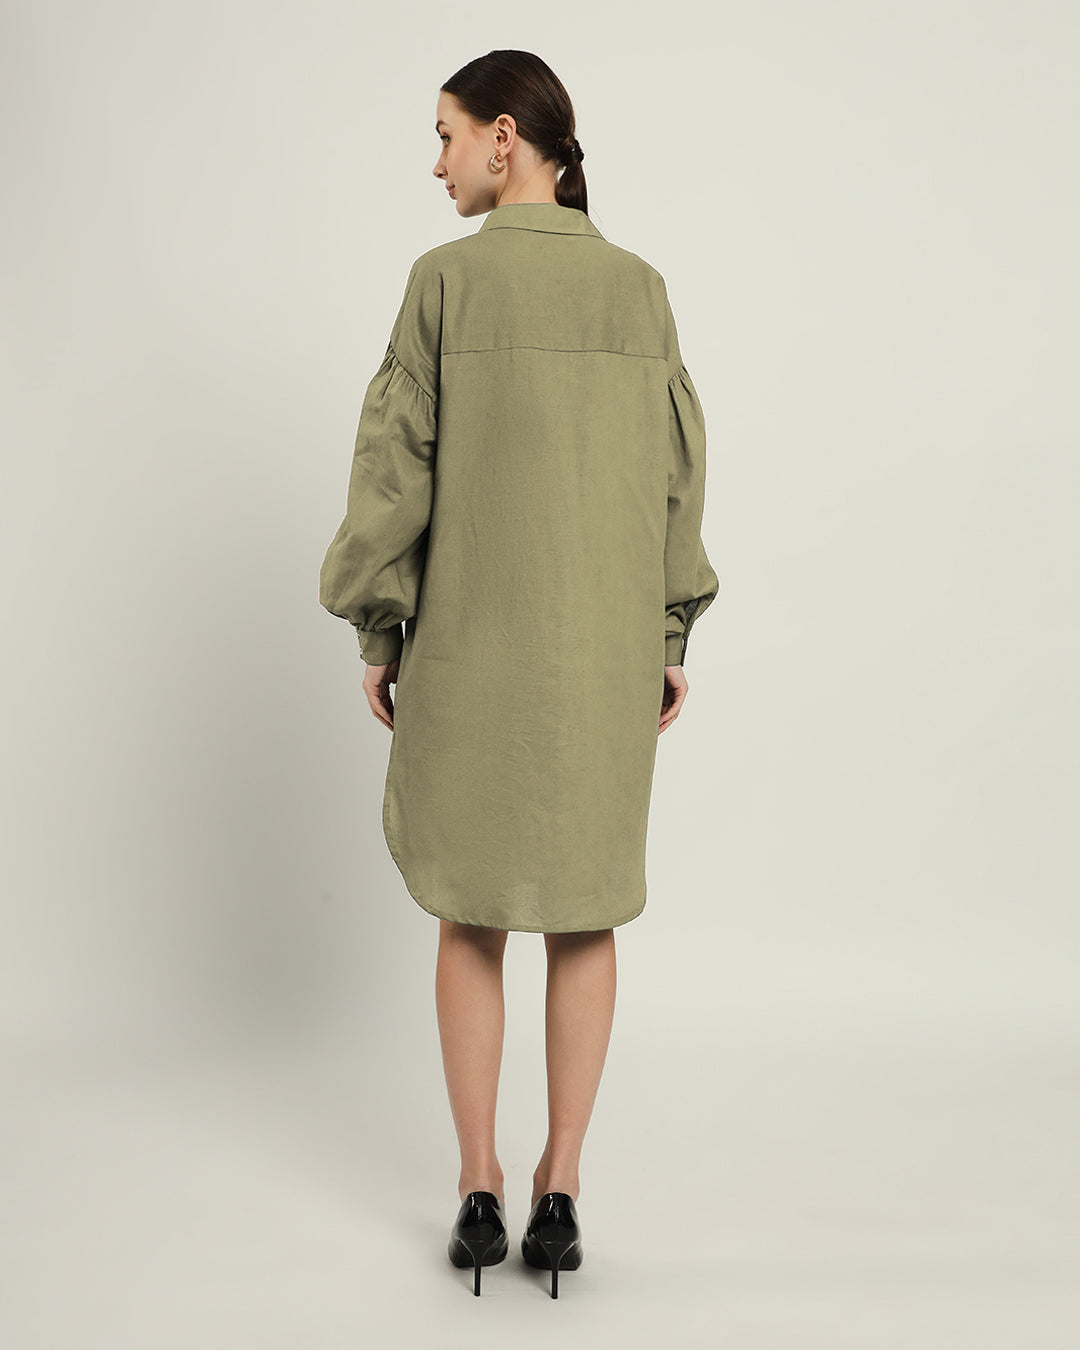 The Derby Daisy Olive Linen Dress